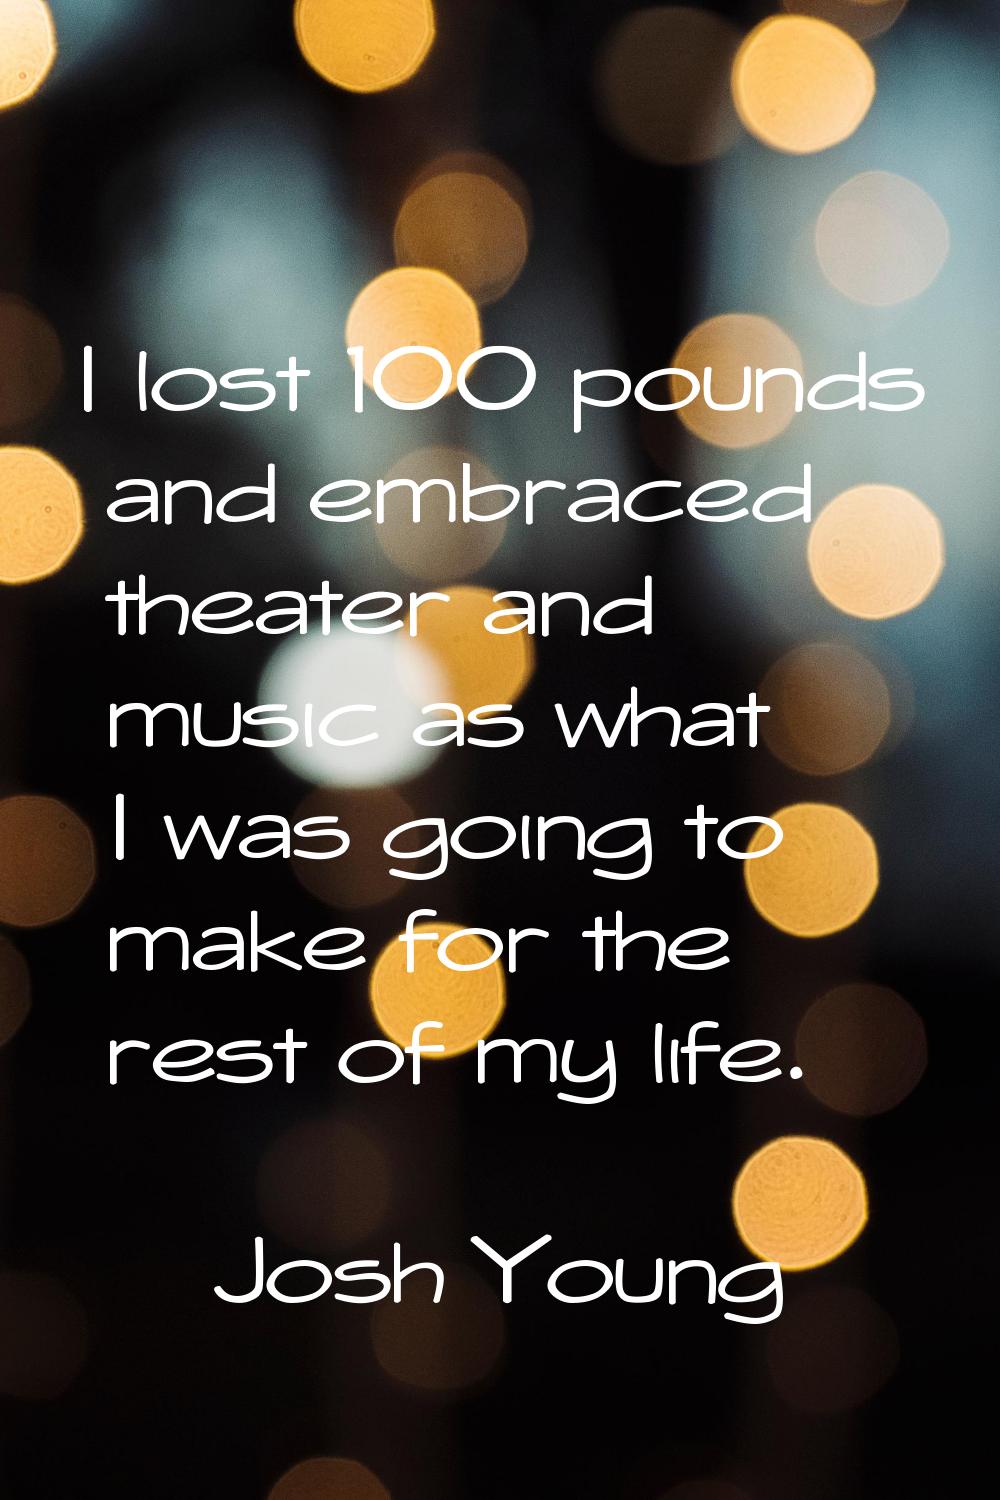 I lost 100 pounds and embraced theater and music as what I was going to make for the rest of my lif